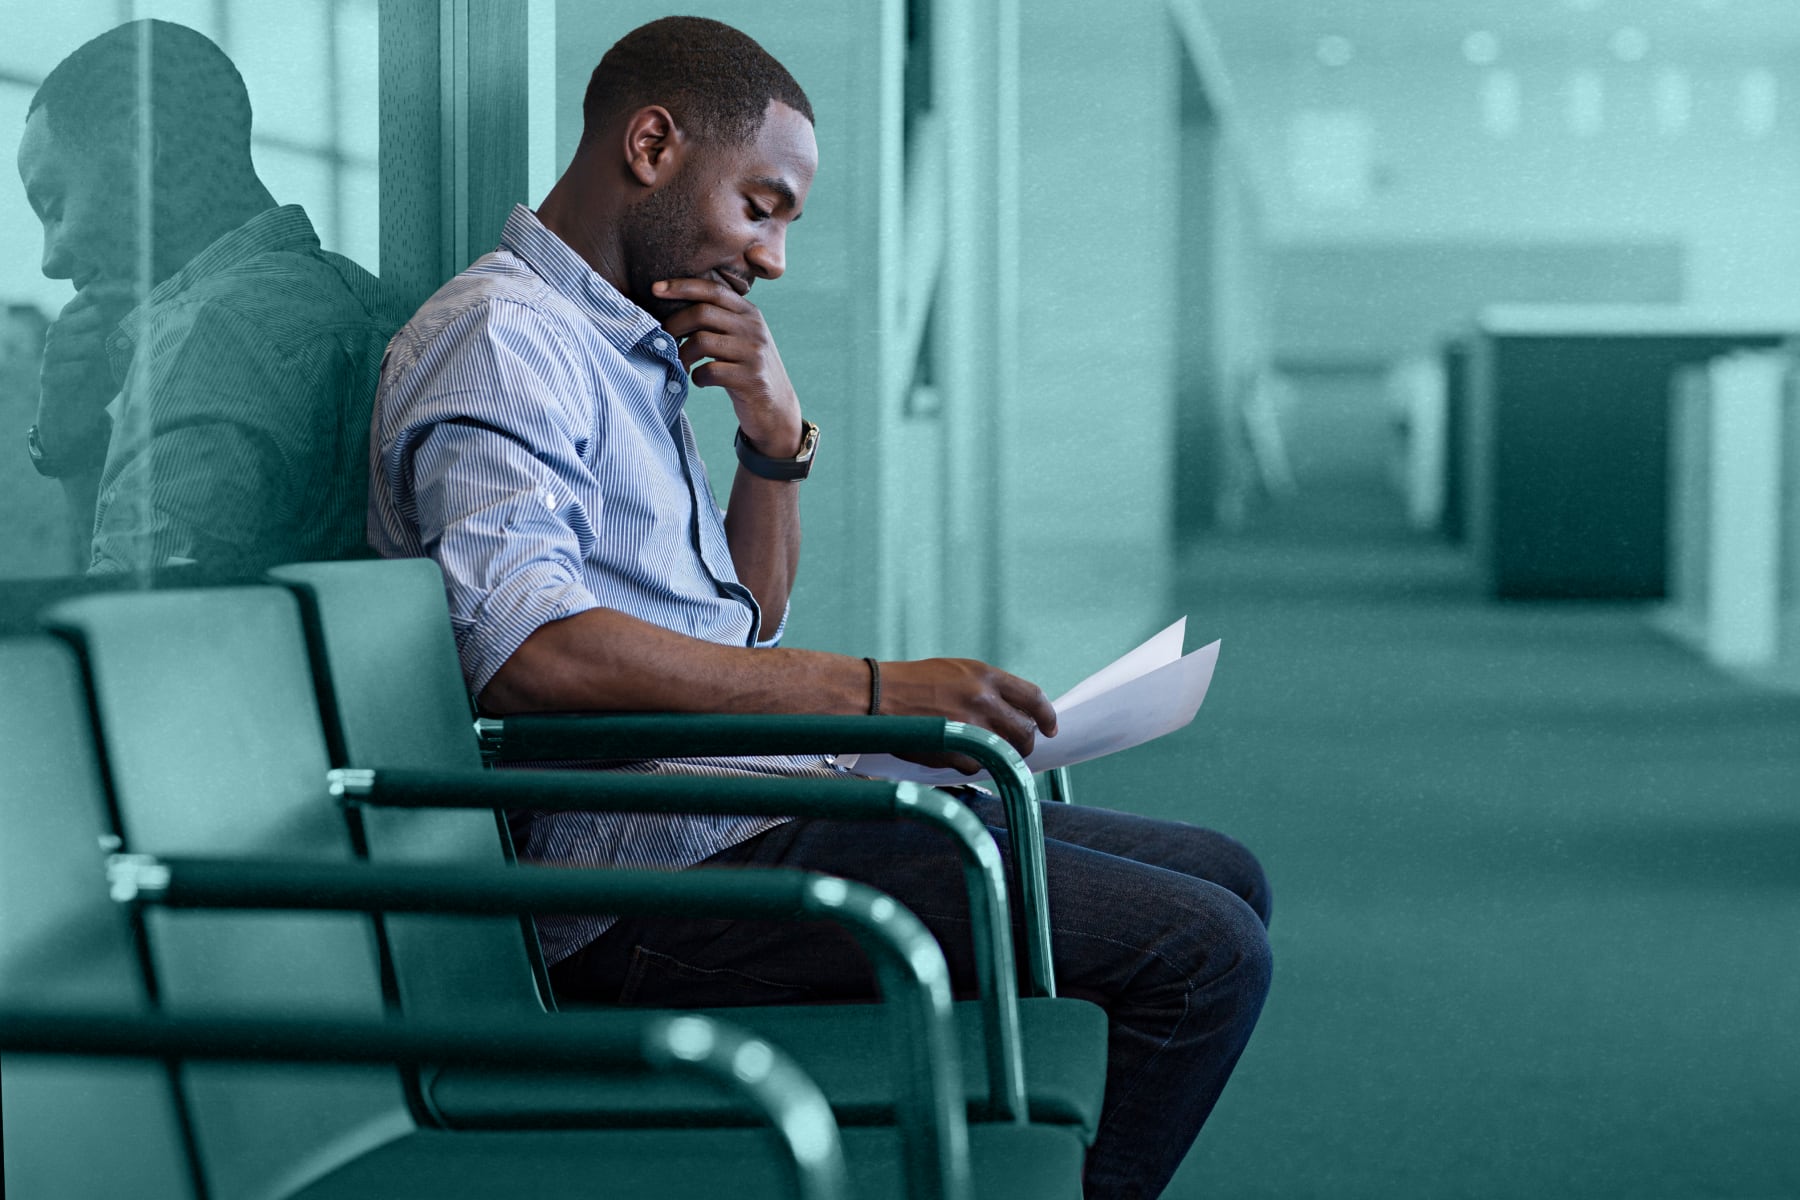 A man sitting on a chair reading over his resume while waiting to be interviewed for a teaching position.